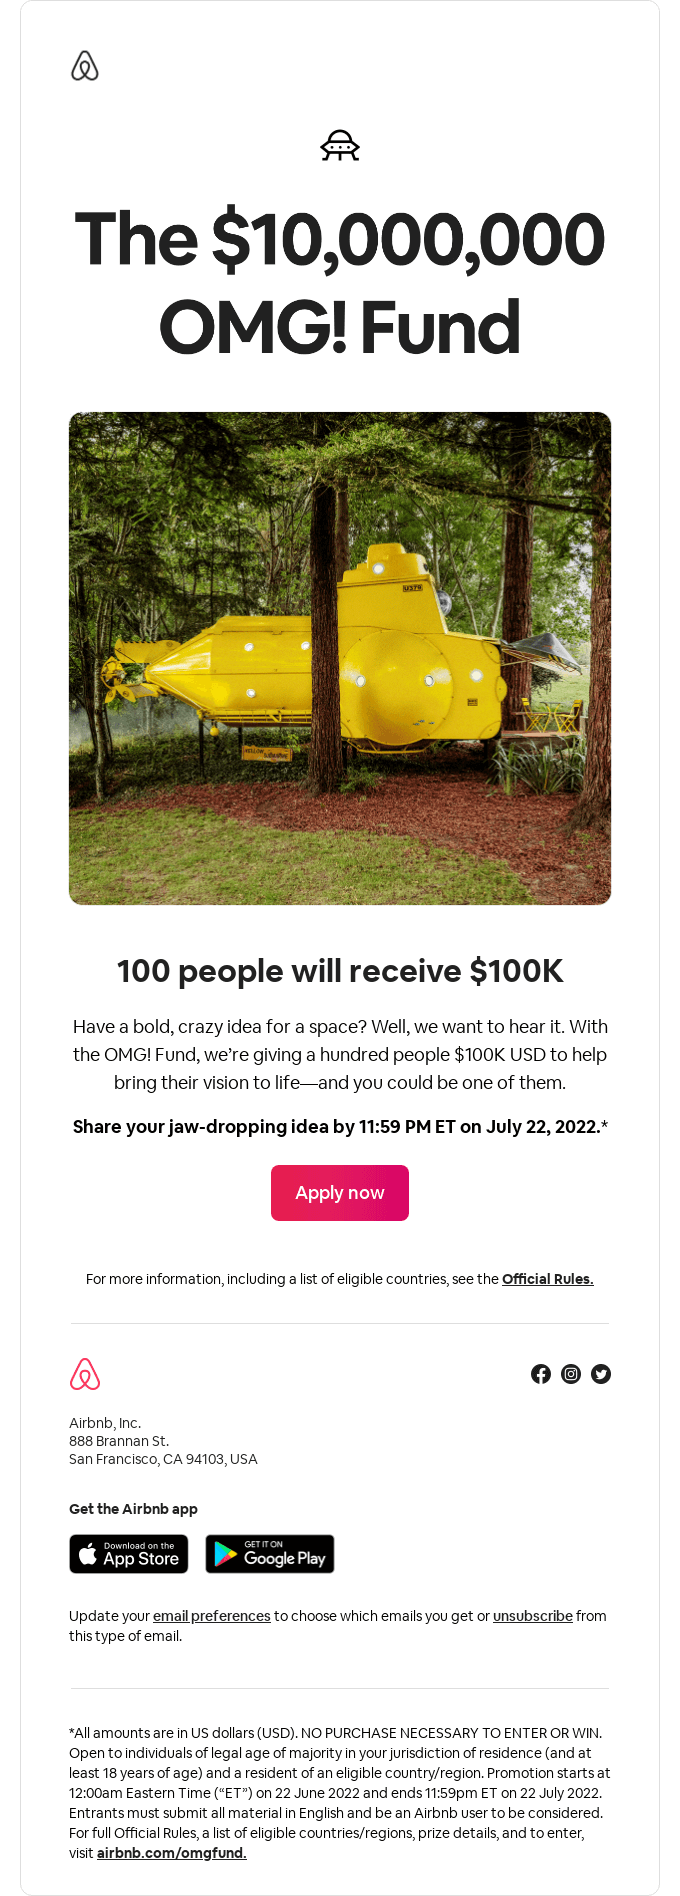 Have a crazy idea for a space? You could get $100K to build it. - Airbnb Email Newsletter